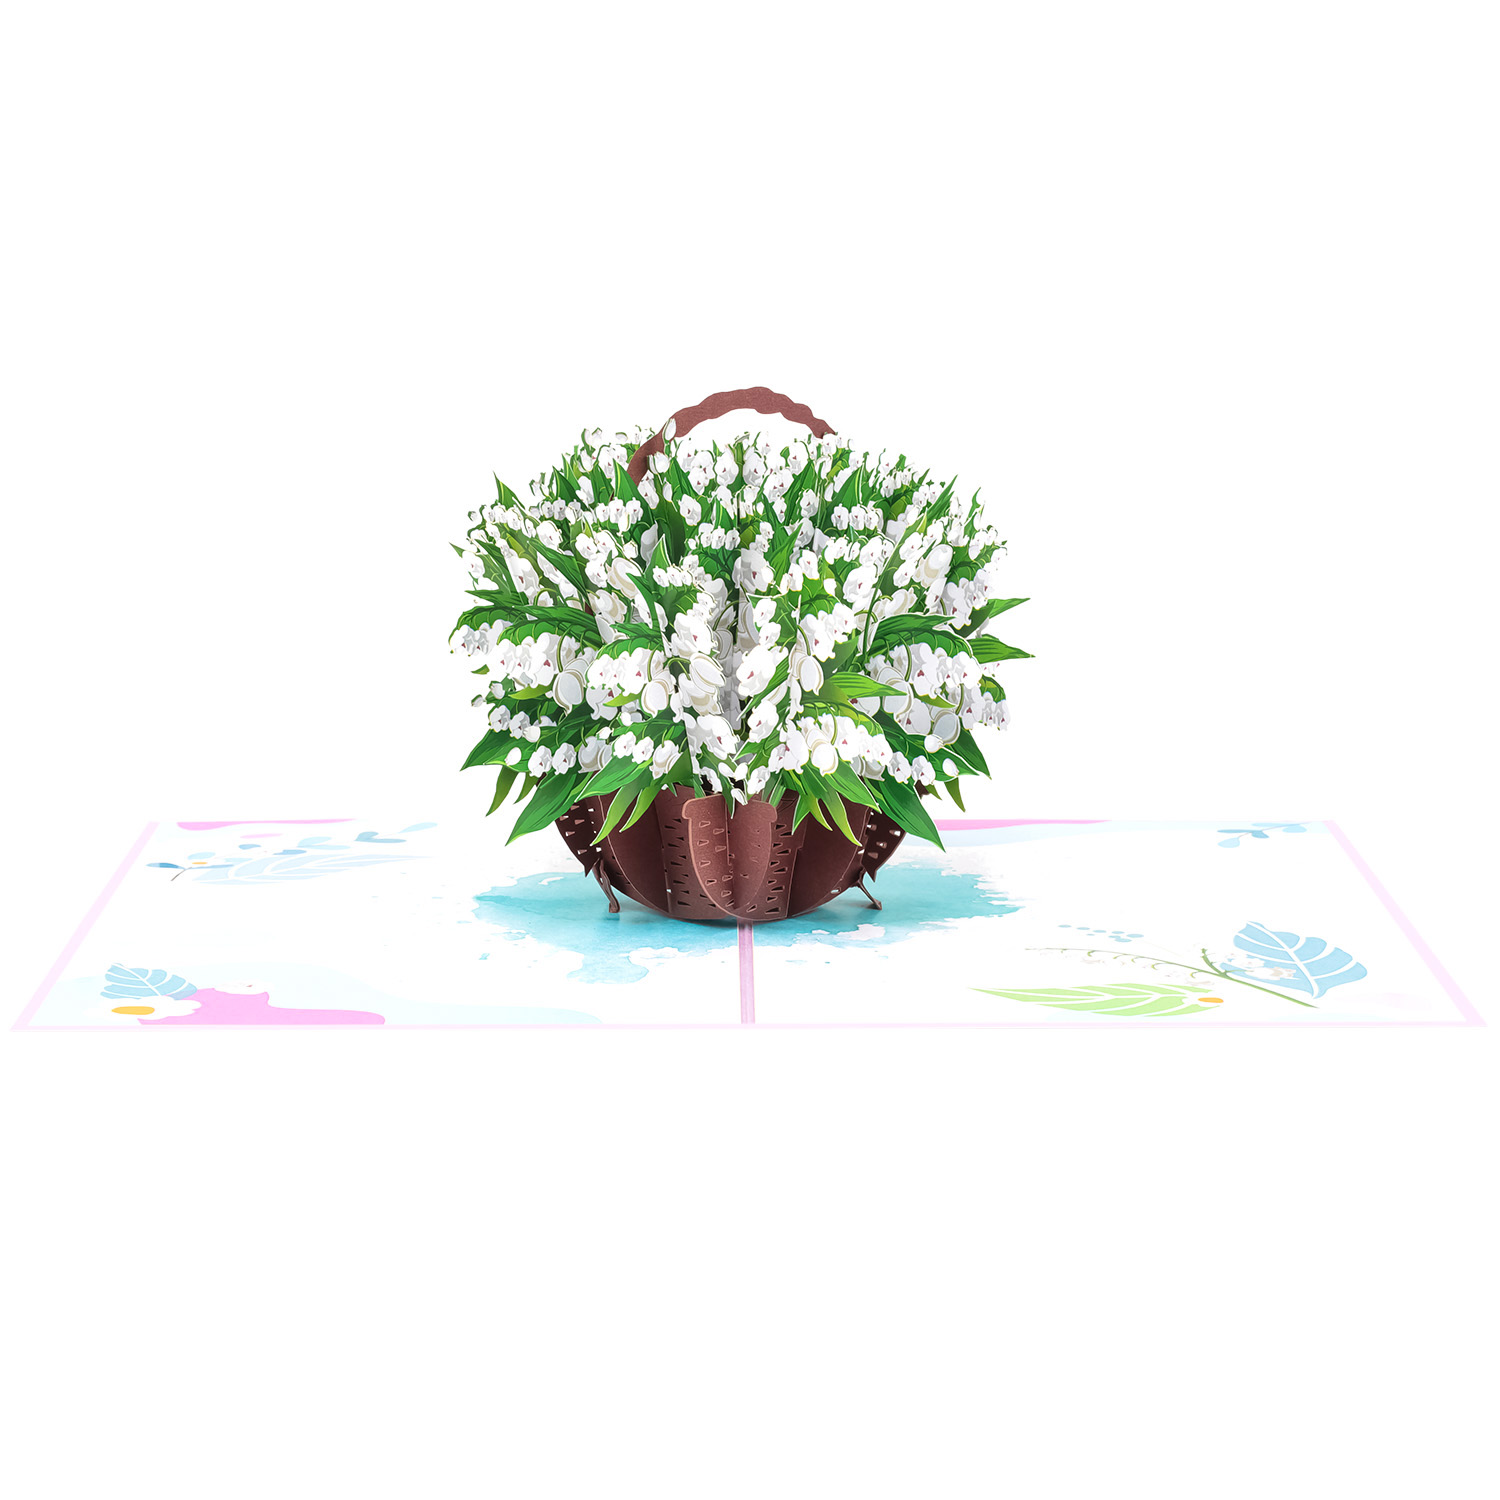 Lilies-of-the-Valley-Basket-Pop-Up-Overview-2-FL083-3D-Pop-Up-Card-Wholesale-Manufacturer-and-Supplier-Thank-you-pop-up-card.jpg